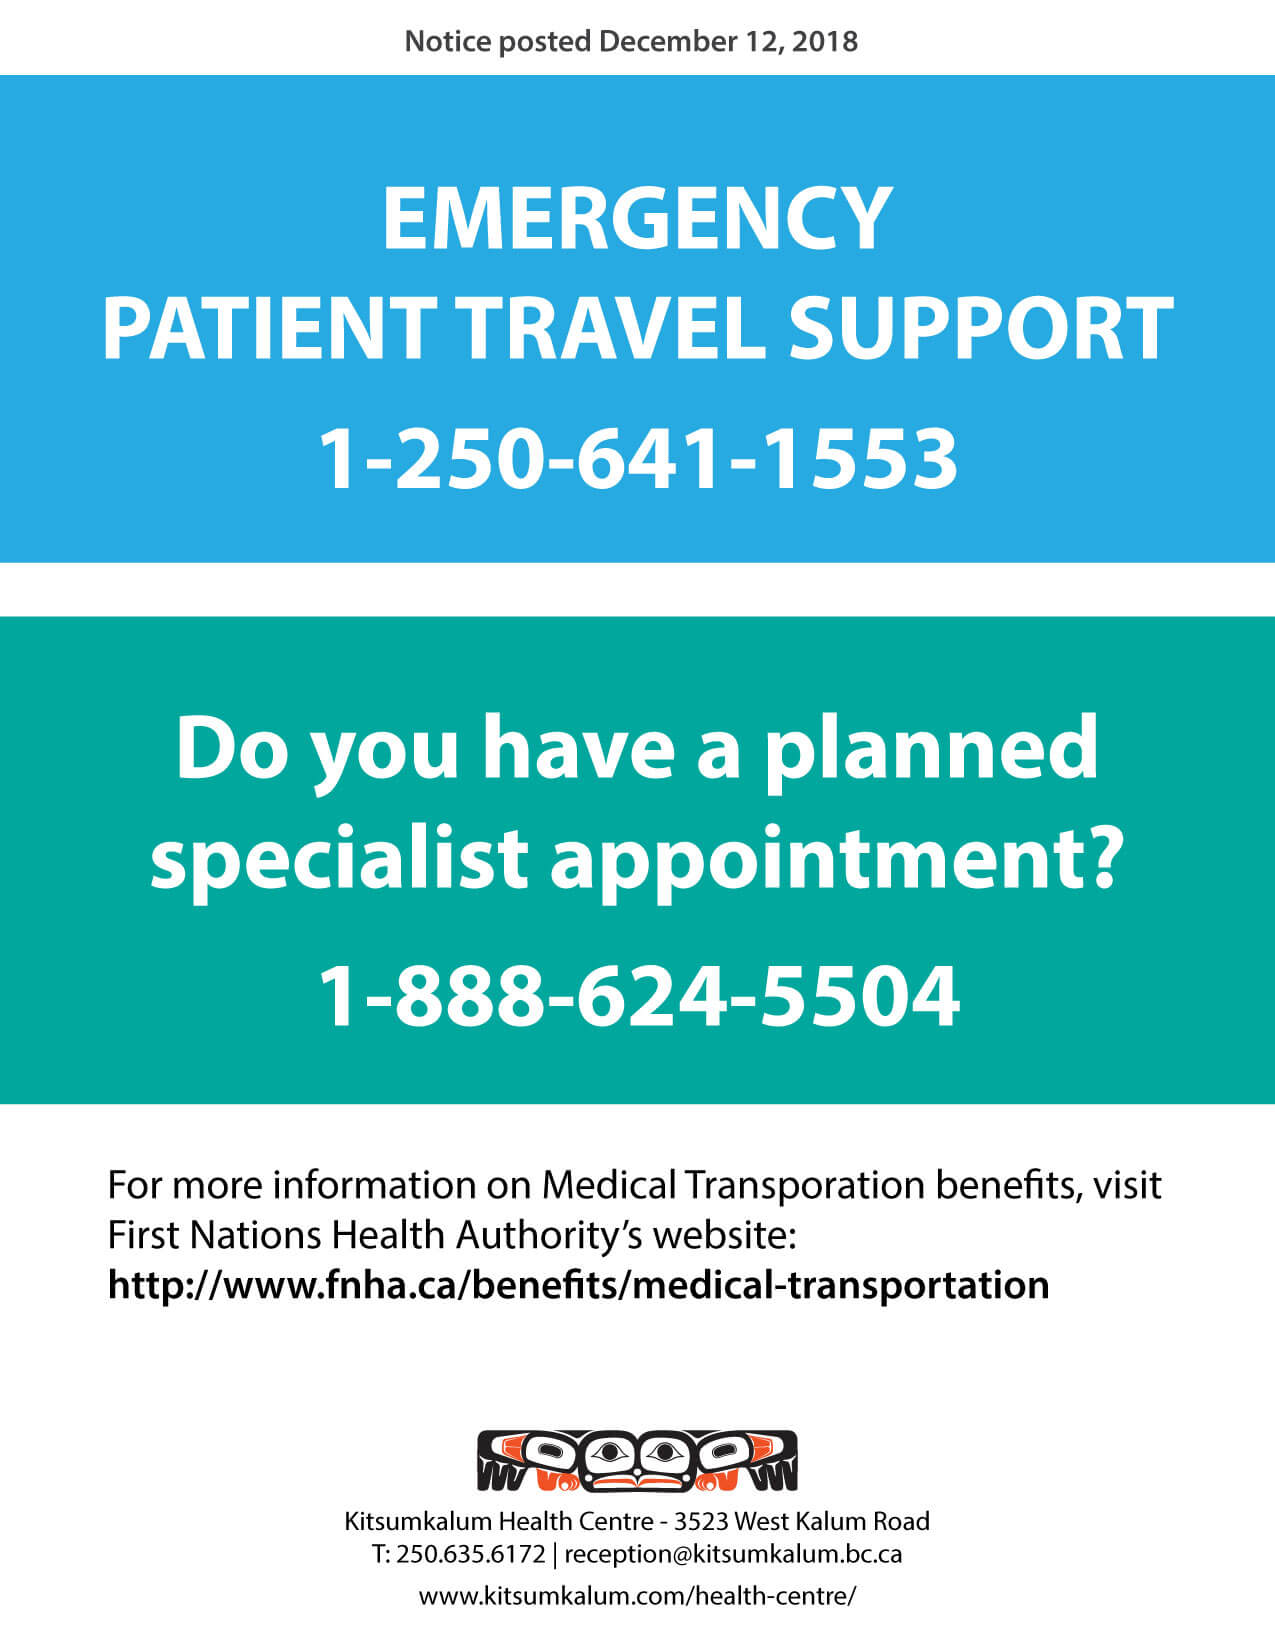 Patient Travel Support